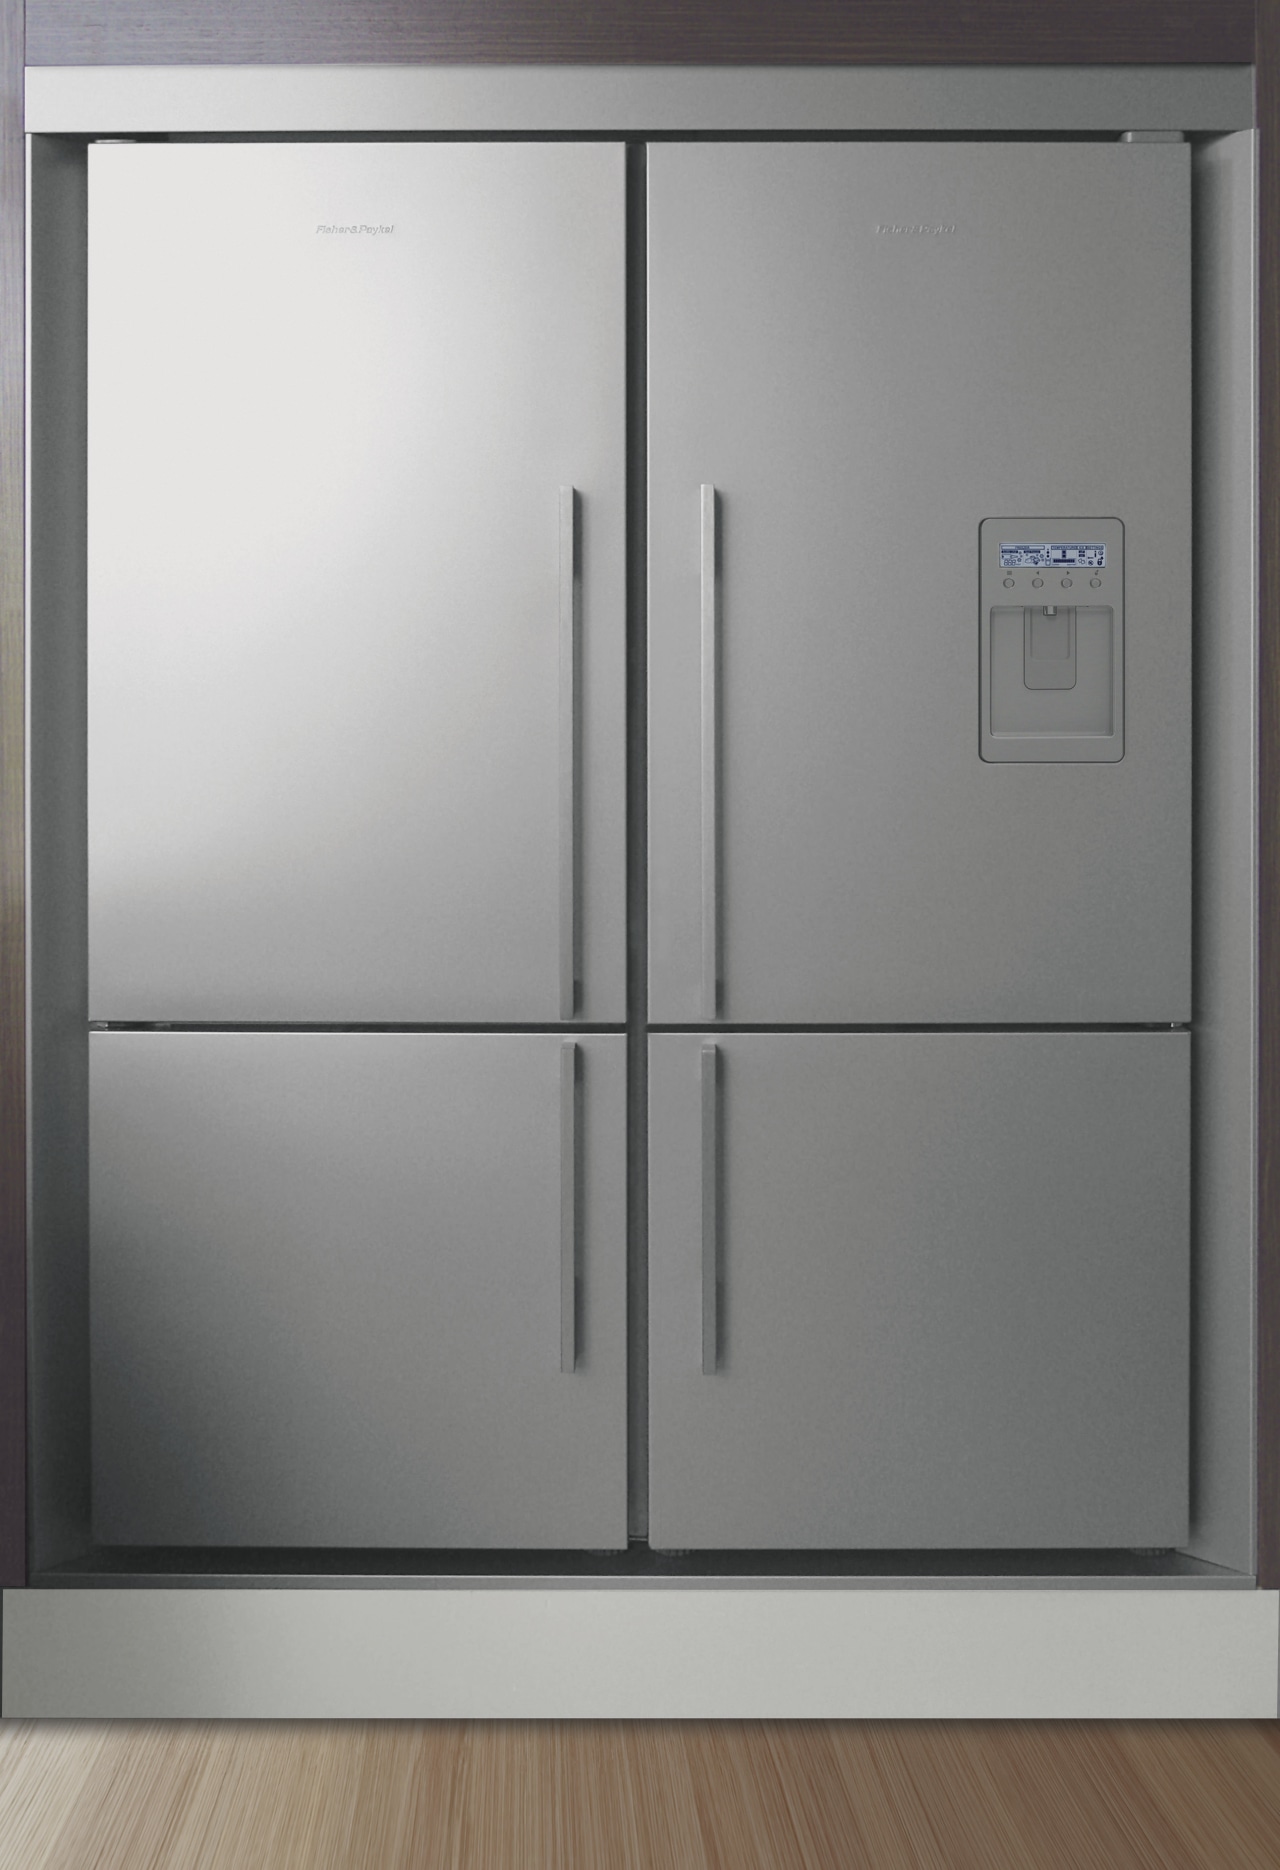 View of double door fridge. cupboard, home appliance, product, product design, gray